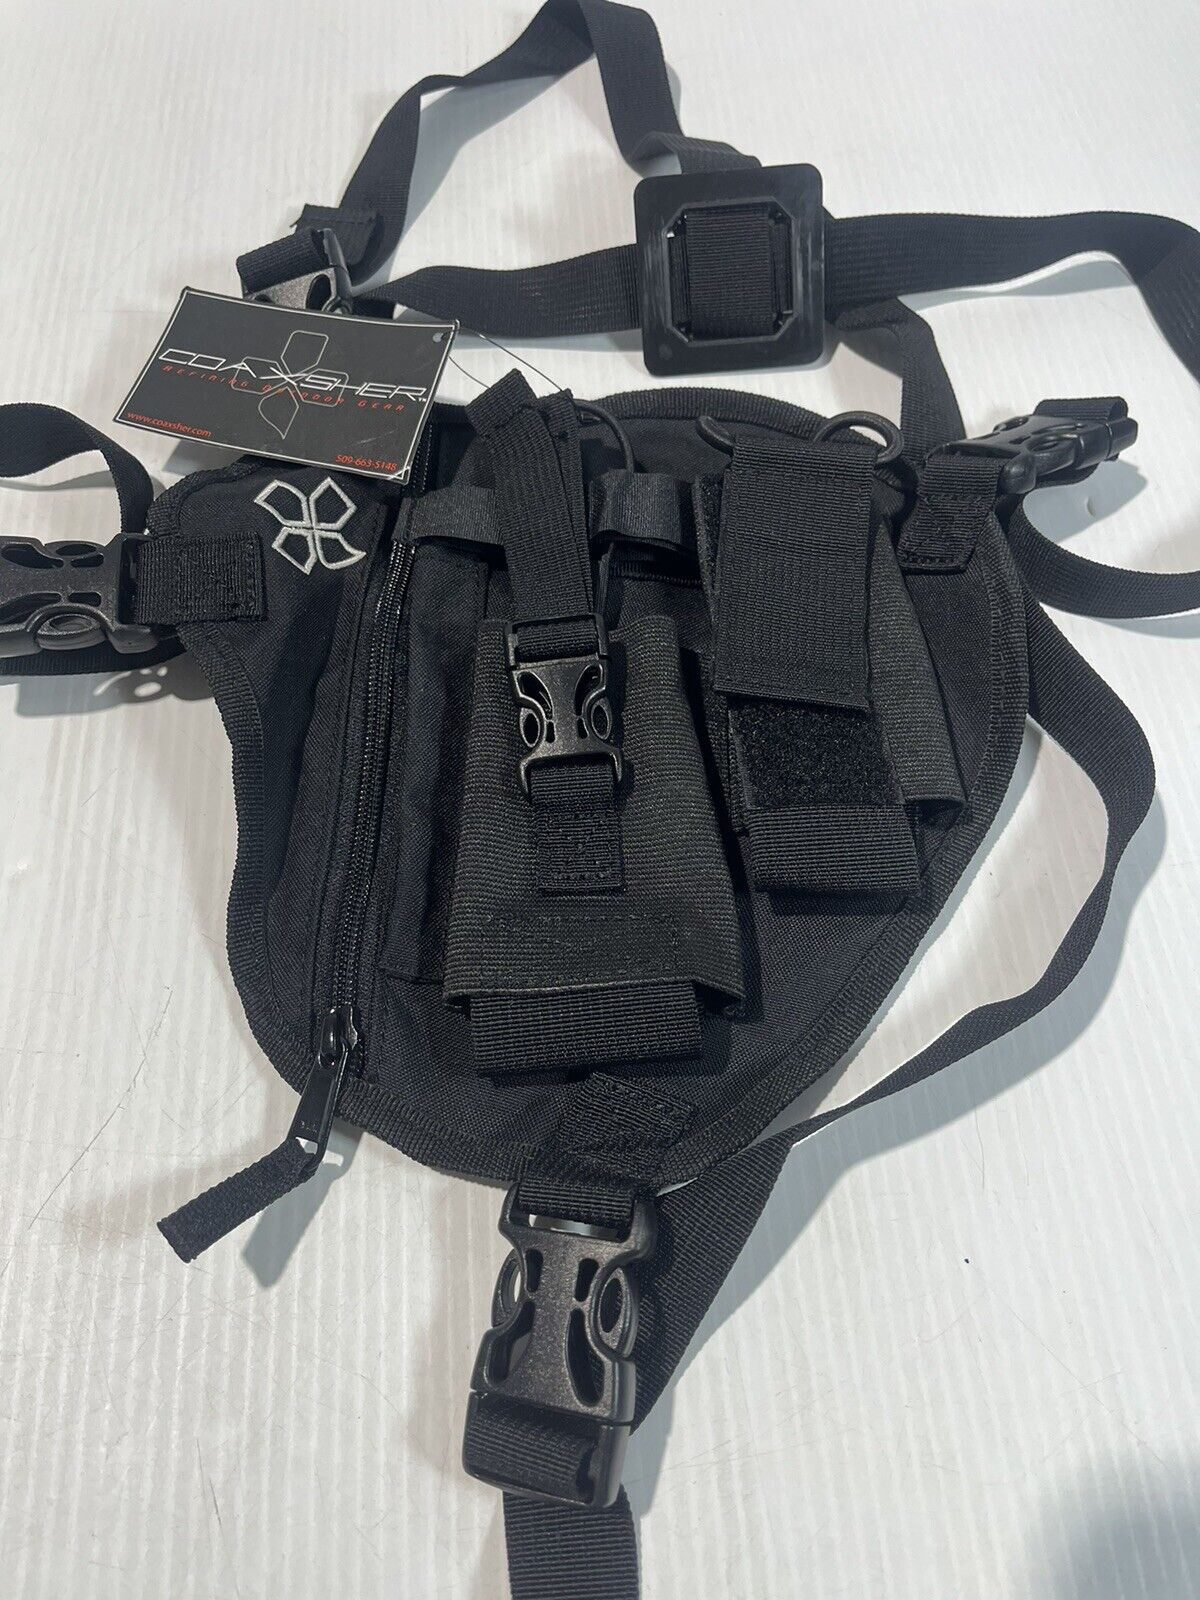 TWO NEW COAXSHER RP-1 SCOUT RADIO CHEST HARNESS,BLACK